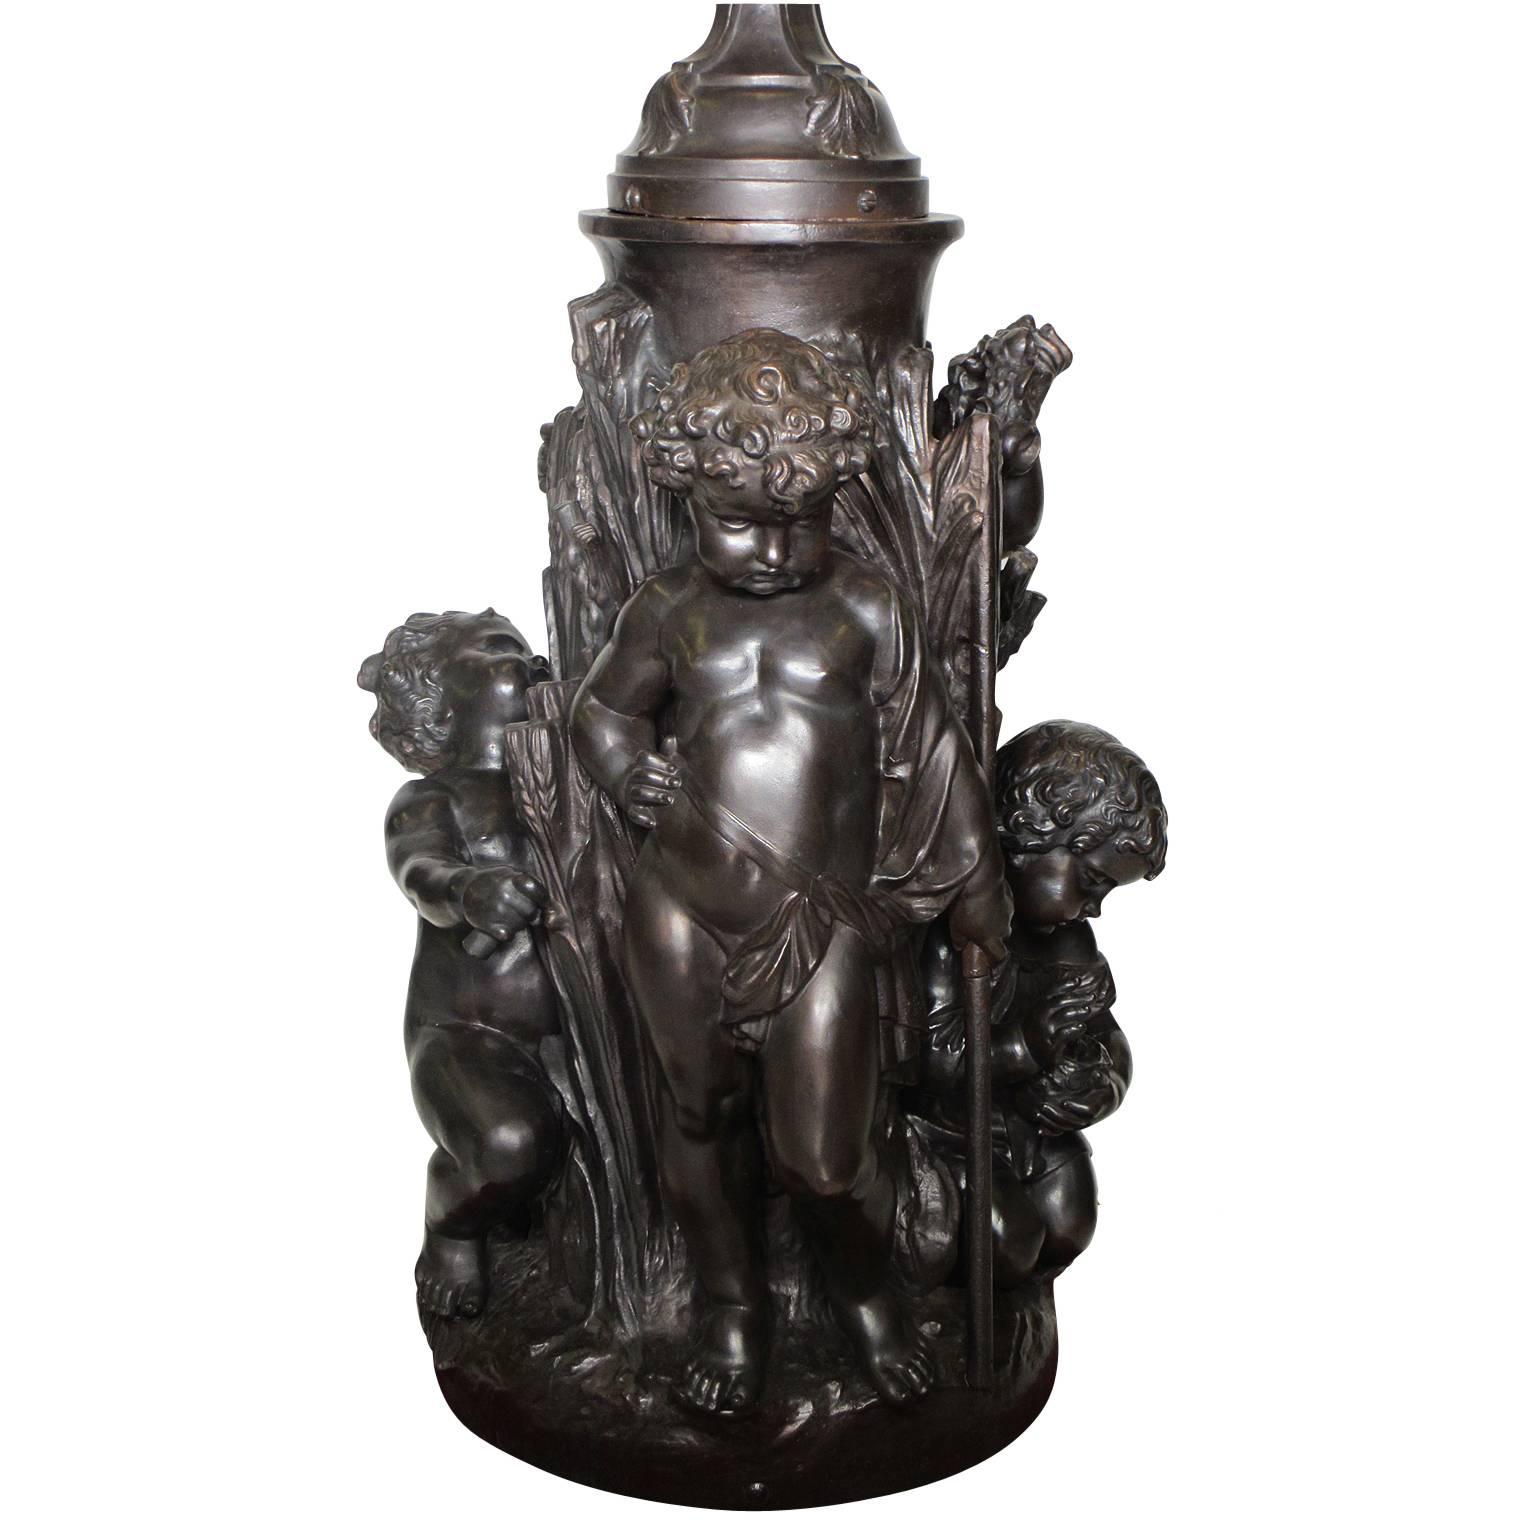 A very fine and palatial French 19th-20th century allegorical figural cast-iron group torchere - sculpture - fountain - representing spring and the harvest, probably cast by Le Fonderies d'Art du Val d'Osne. The charming four-putti sculpture with a